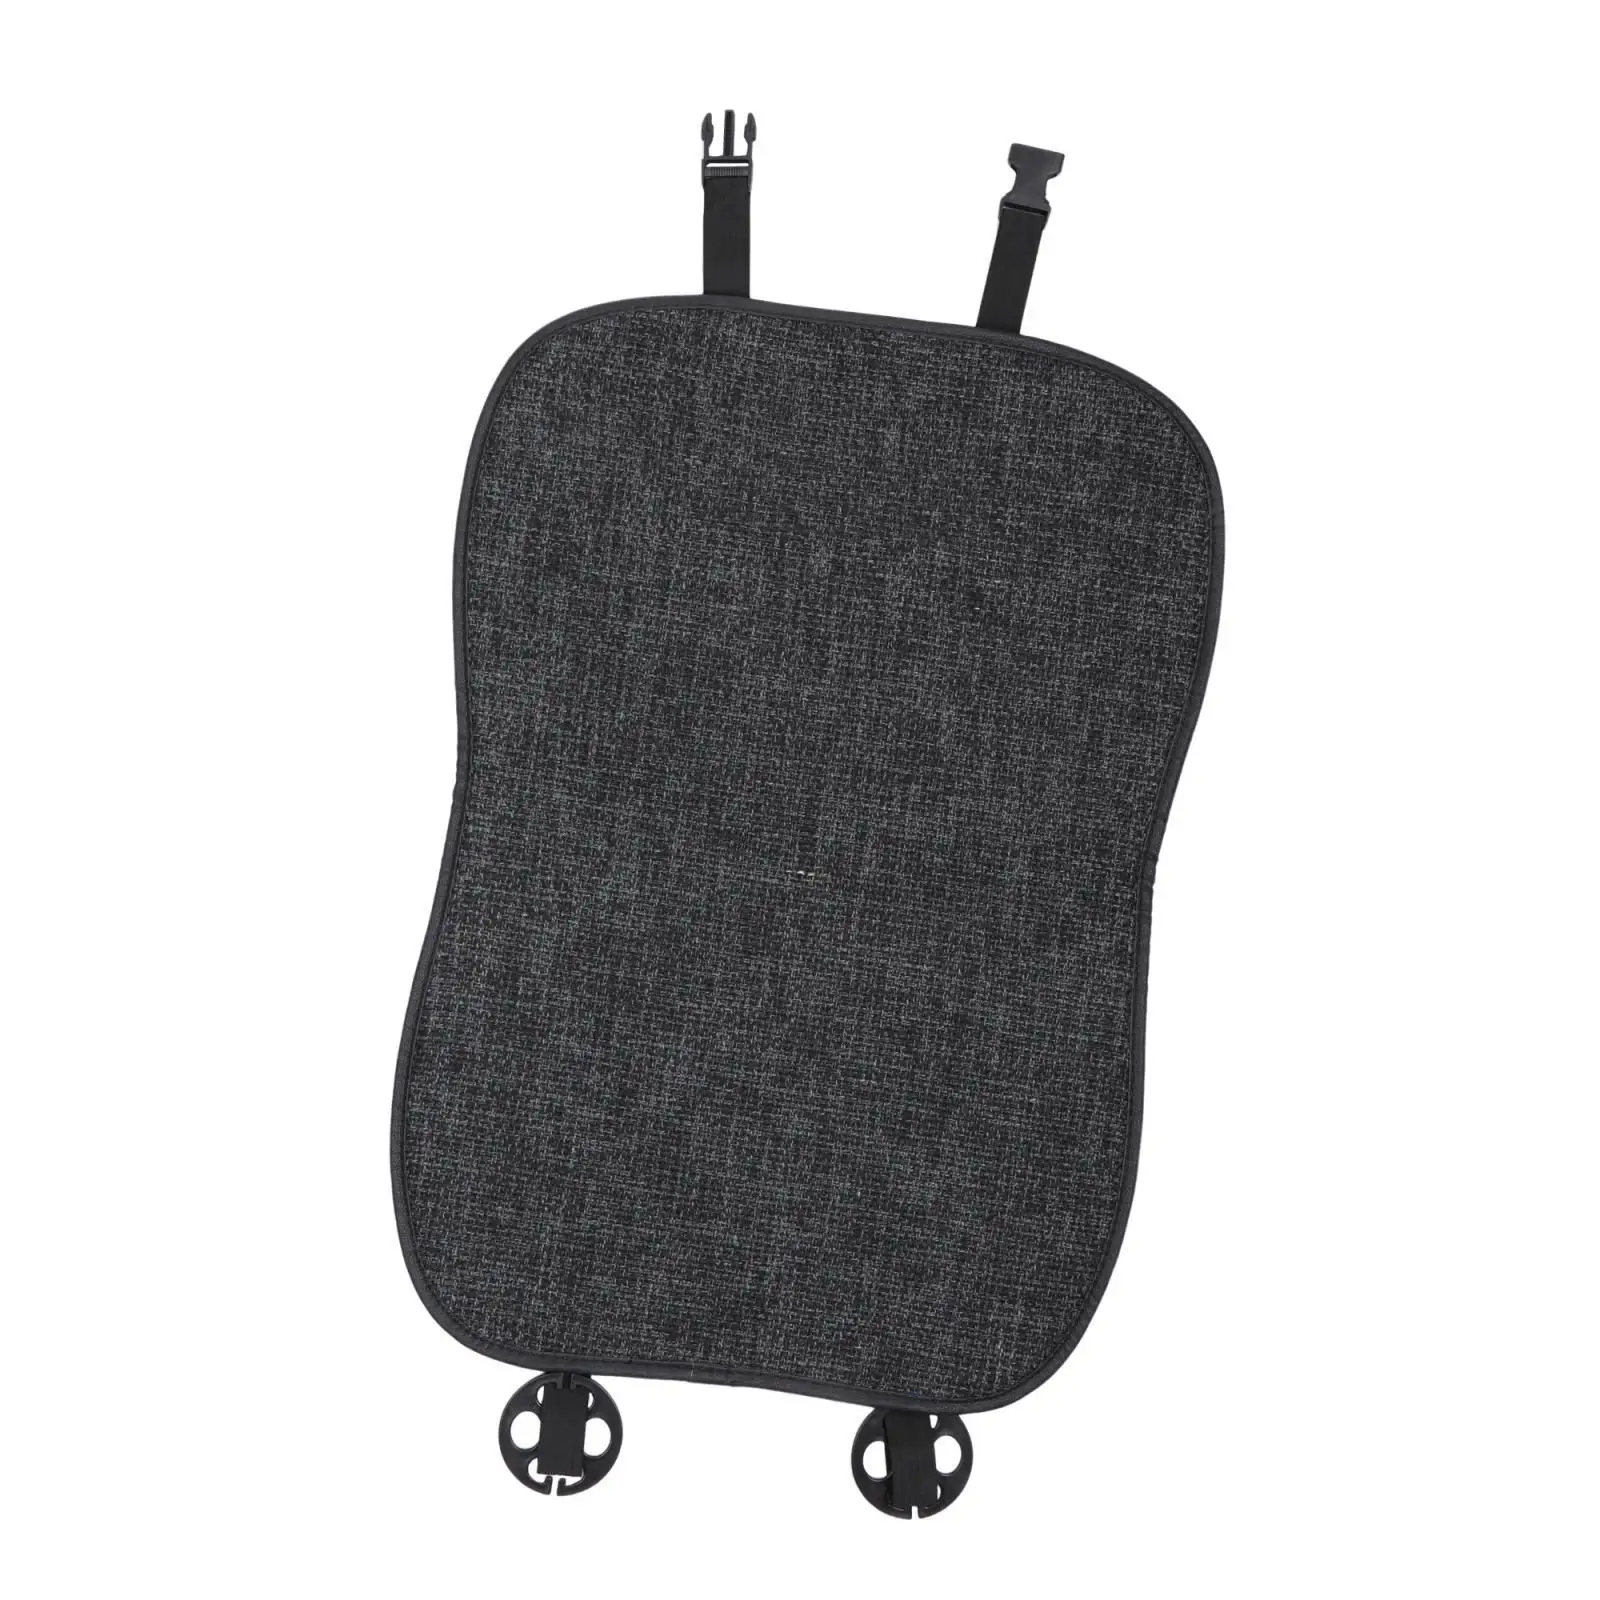 Vehicle Car Seat Cover Cushion for Byd Atto 3 Available in All Seasons Grey Accessories Durable